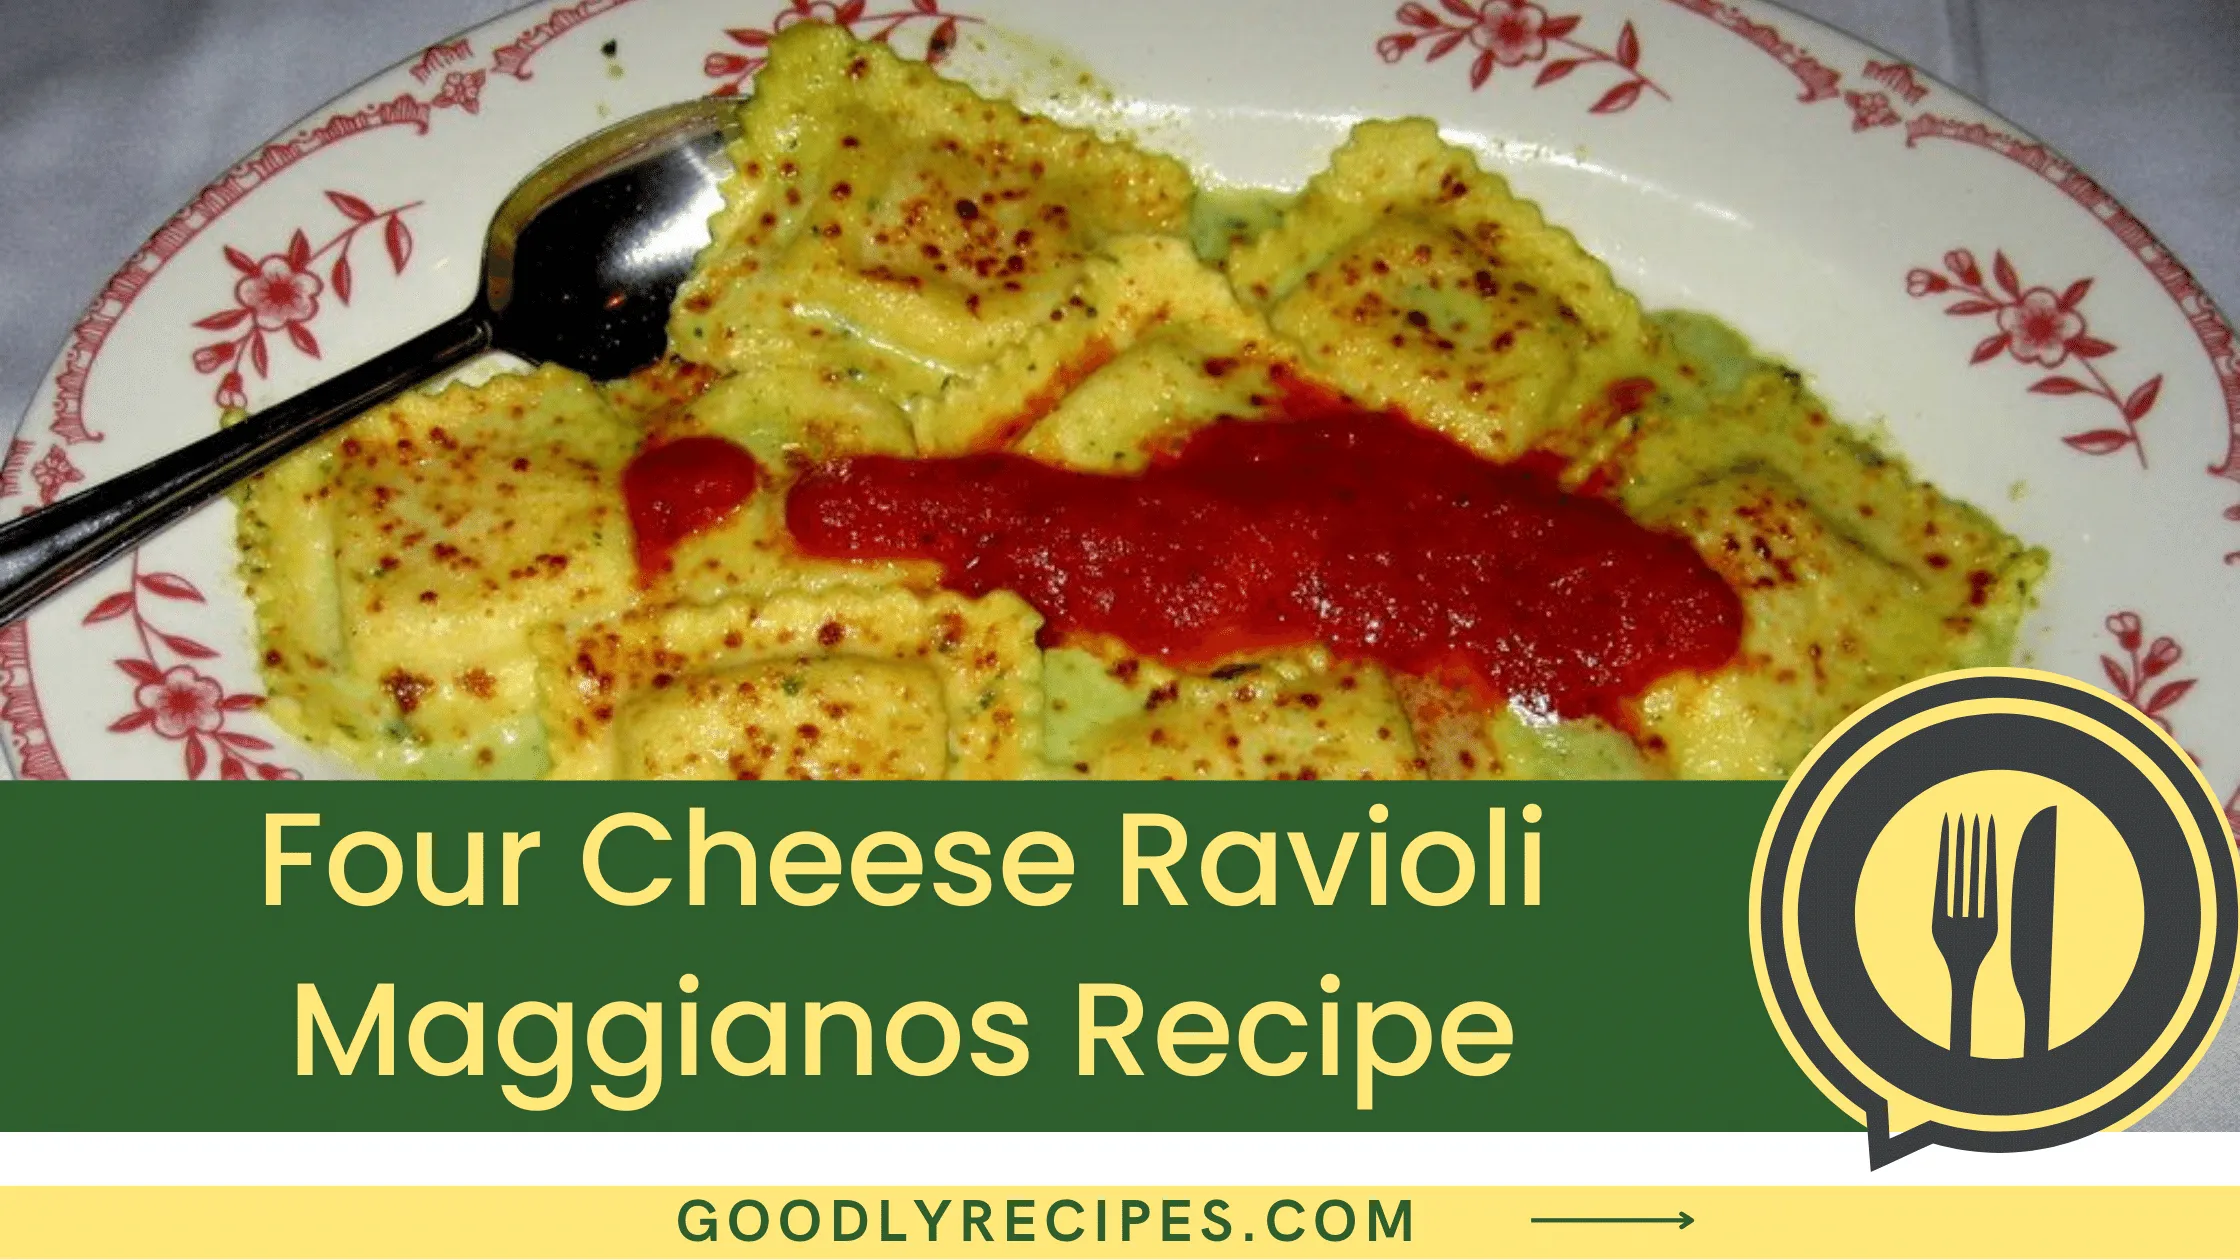 What is Four Cheese Ravioli Muggiano’s?